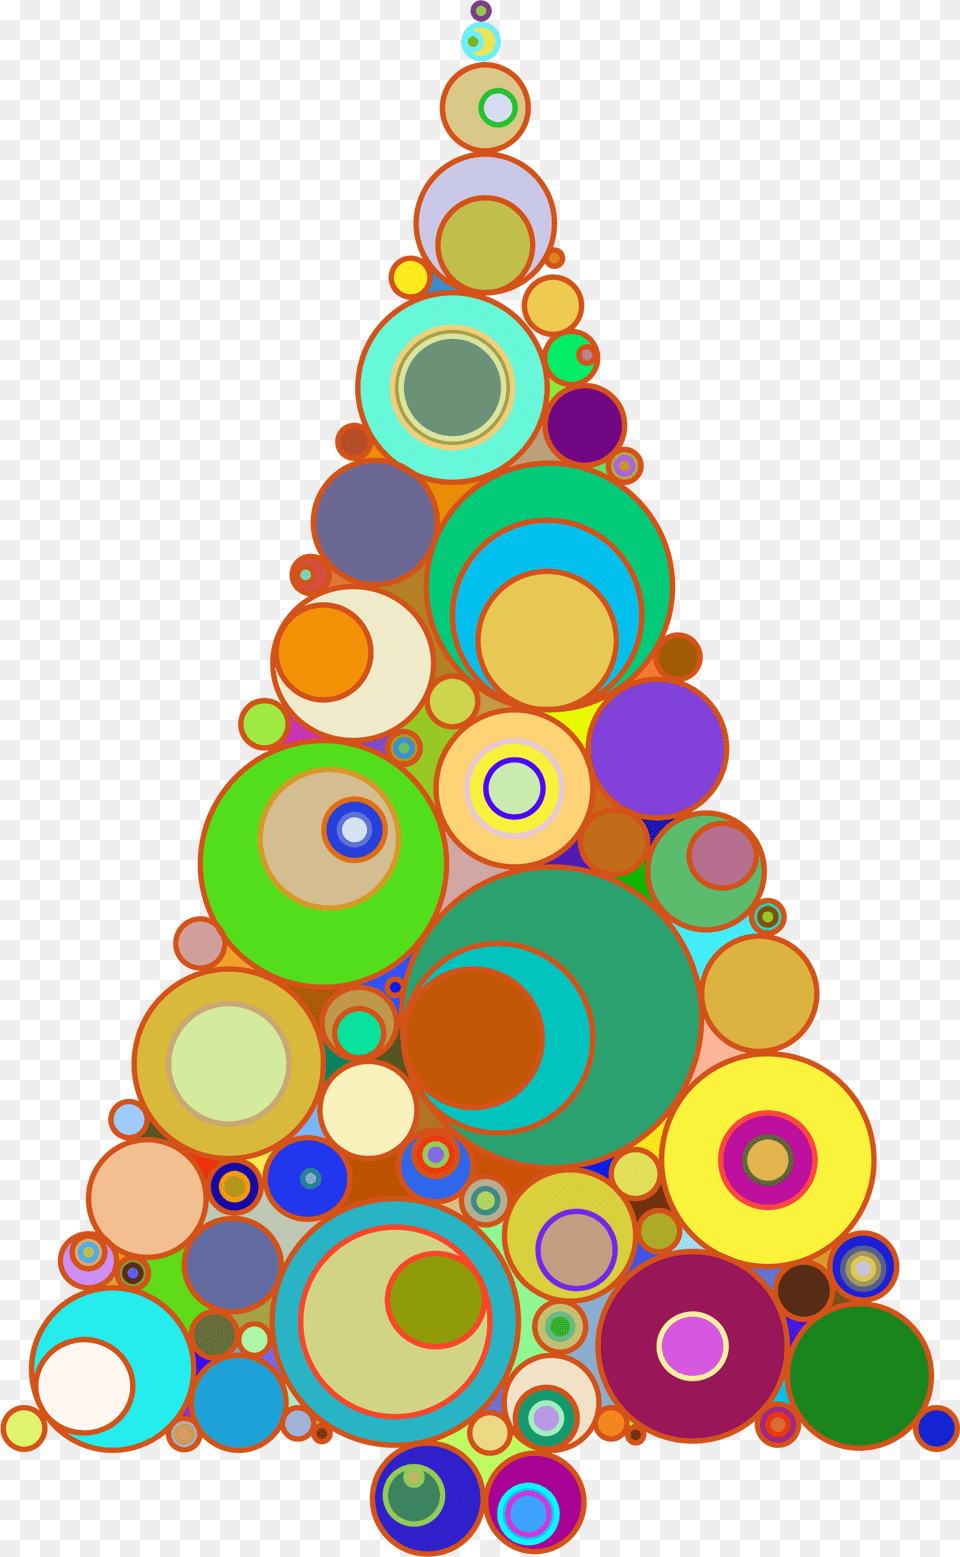 Colorful Abstract Circles Christmas Tree Clip Arts Circles To A Christmas Tree, Lighting, Art, Graphics, Christmas Decorations Png